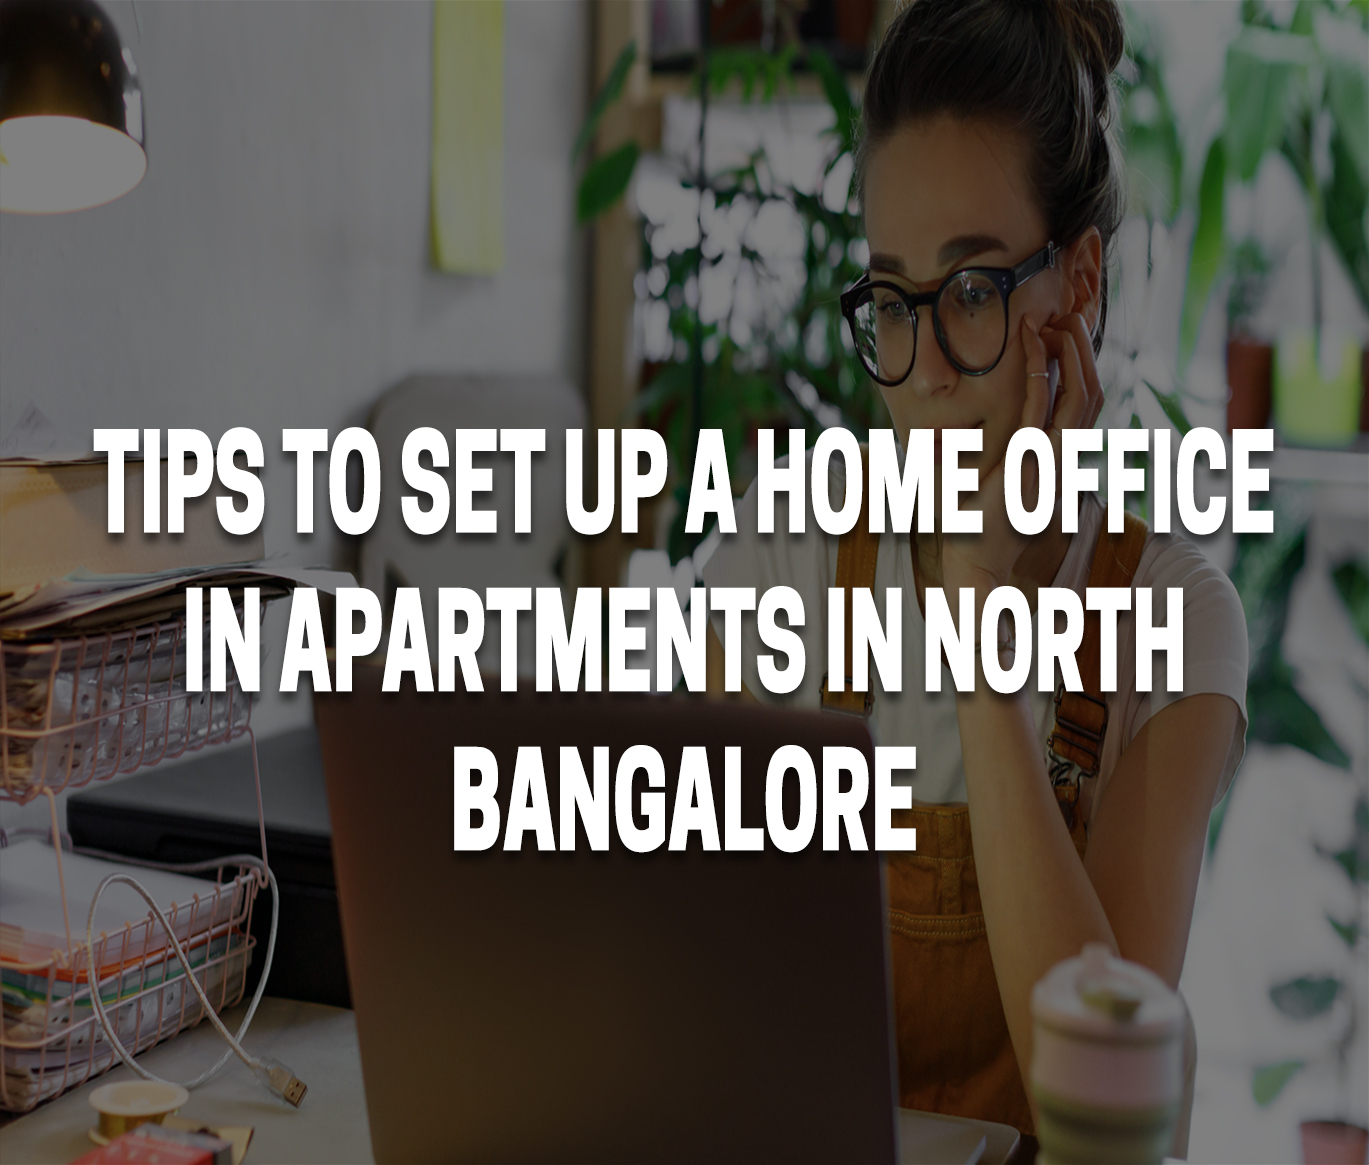 Tips to set up a home office in apartments in North Bangalore